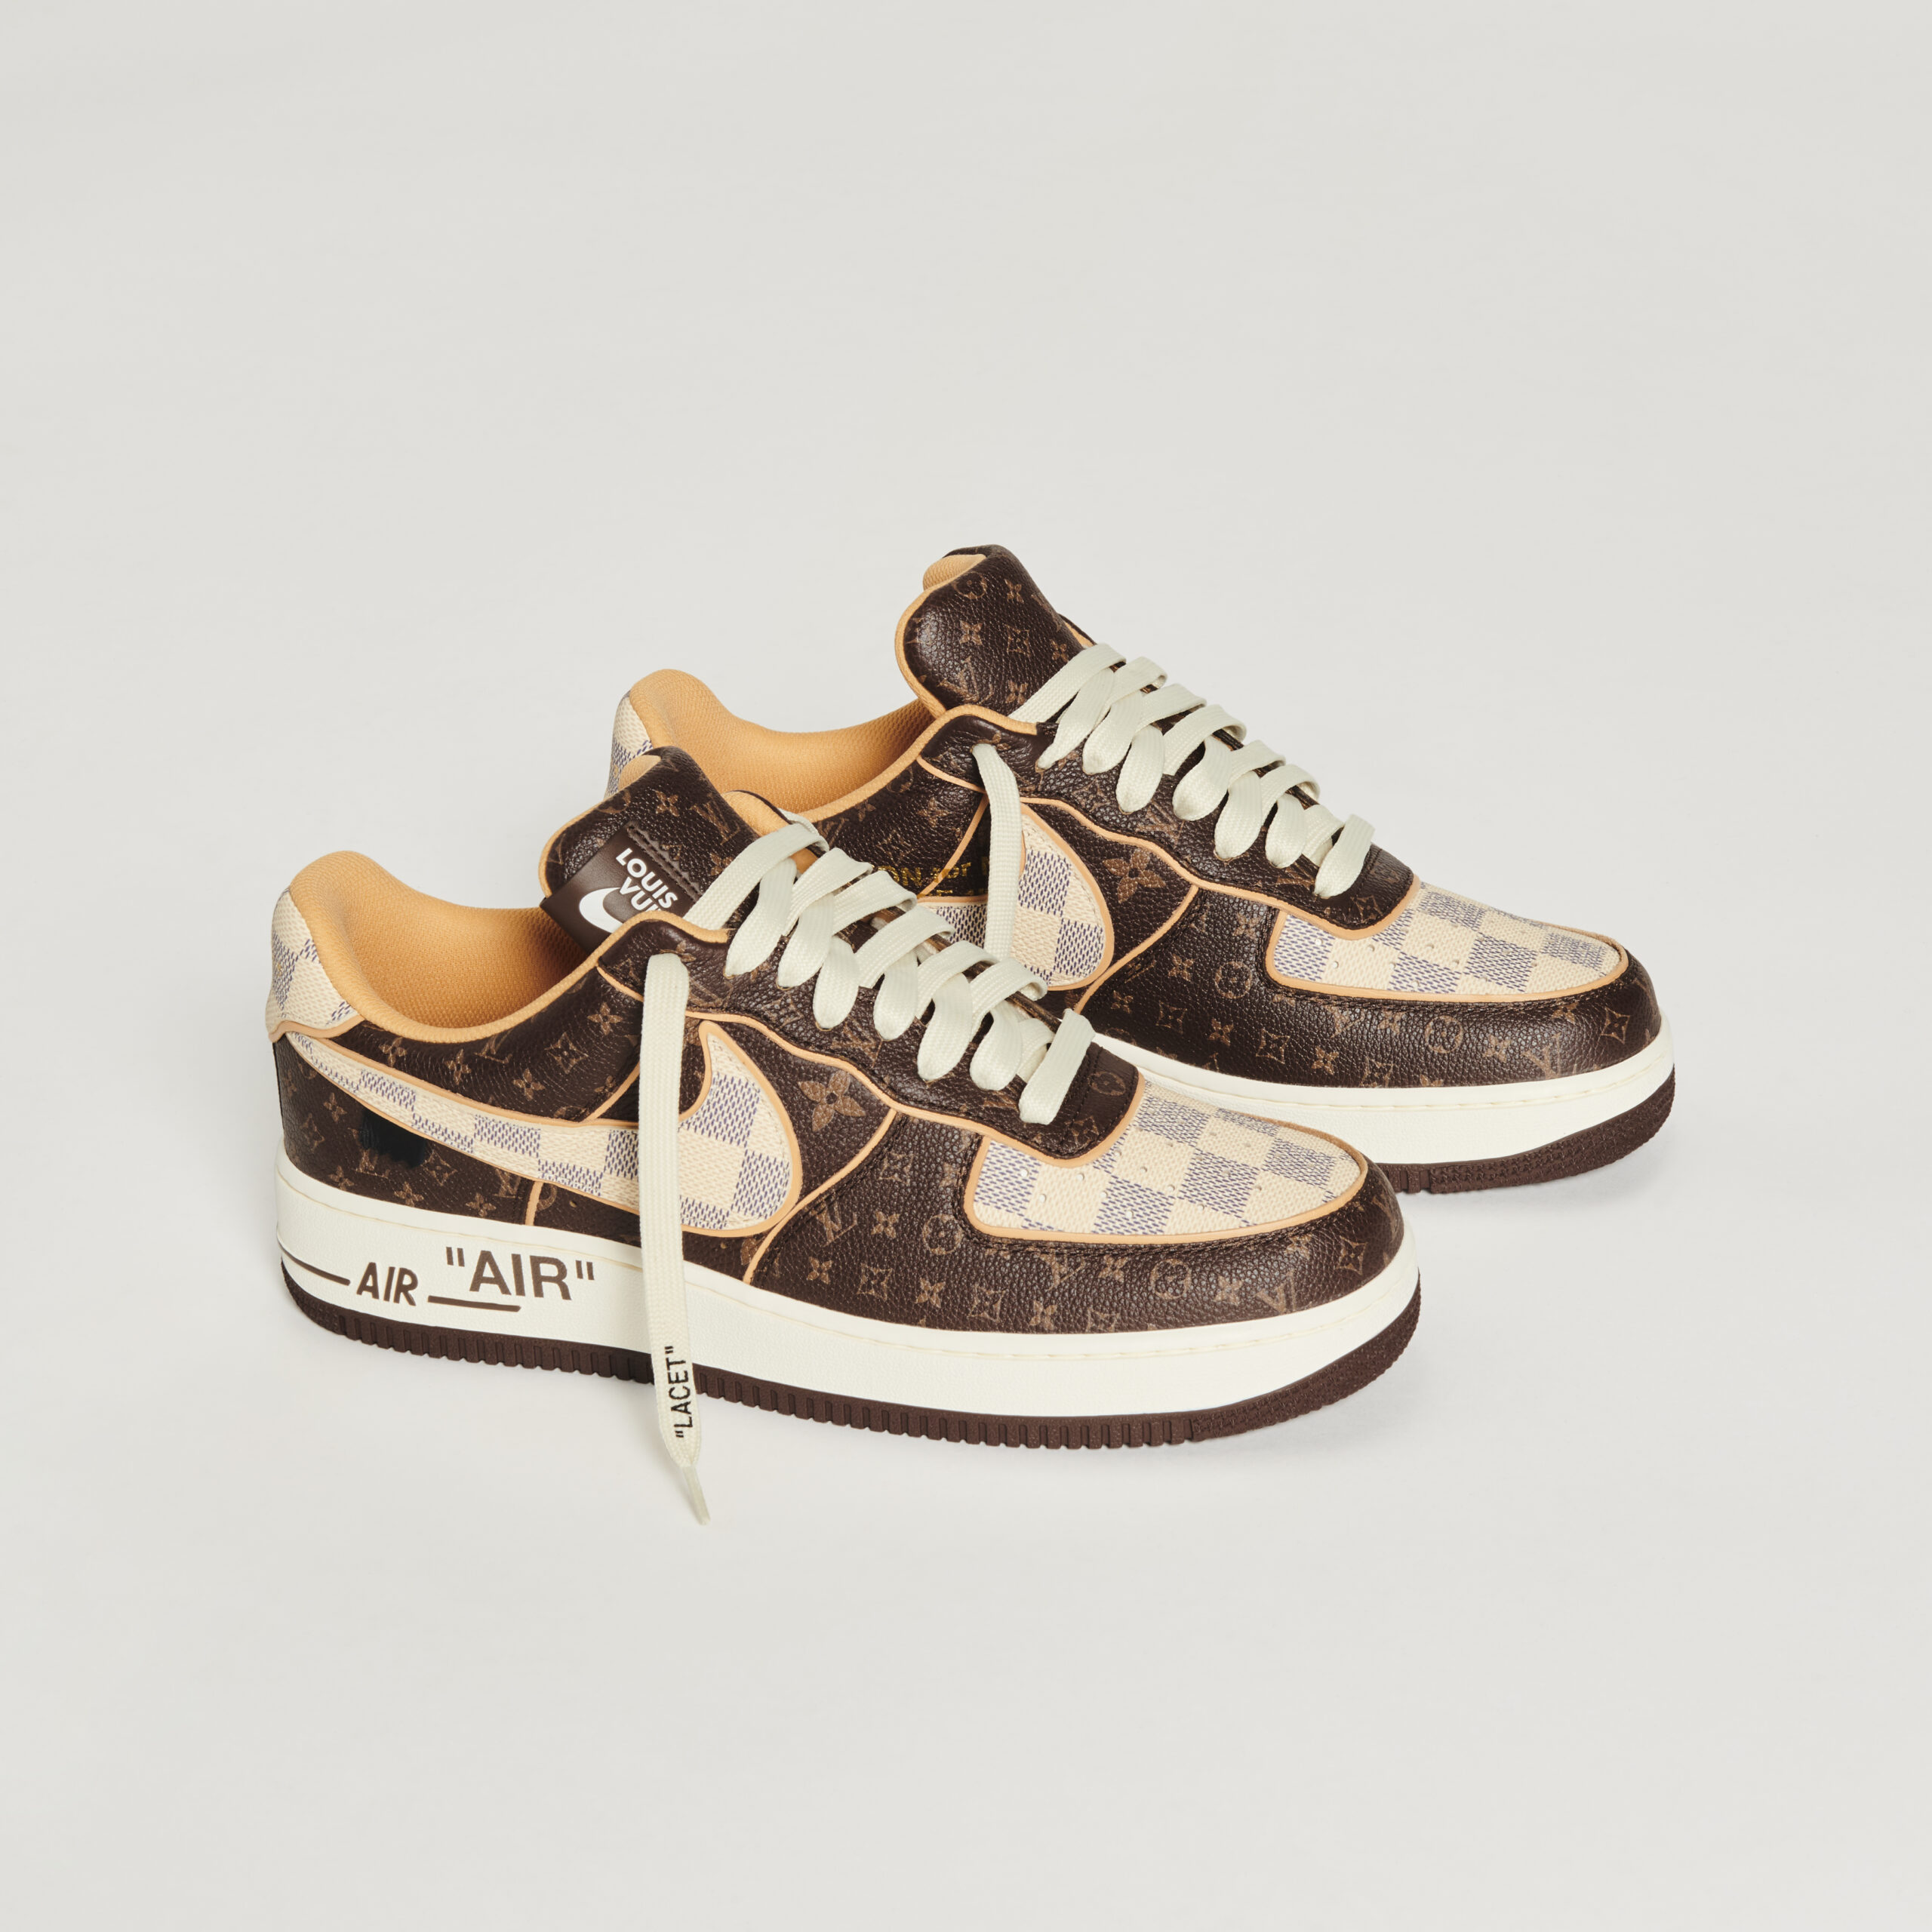 The Louis Vuitton and Nike expression of the “Air Force 1” by Virgil Abloh  Auction at Sotheby's, Press Release